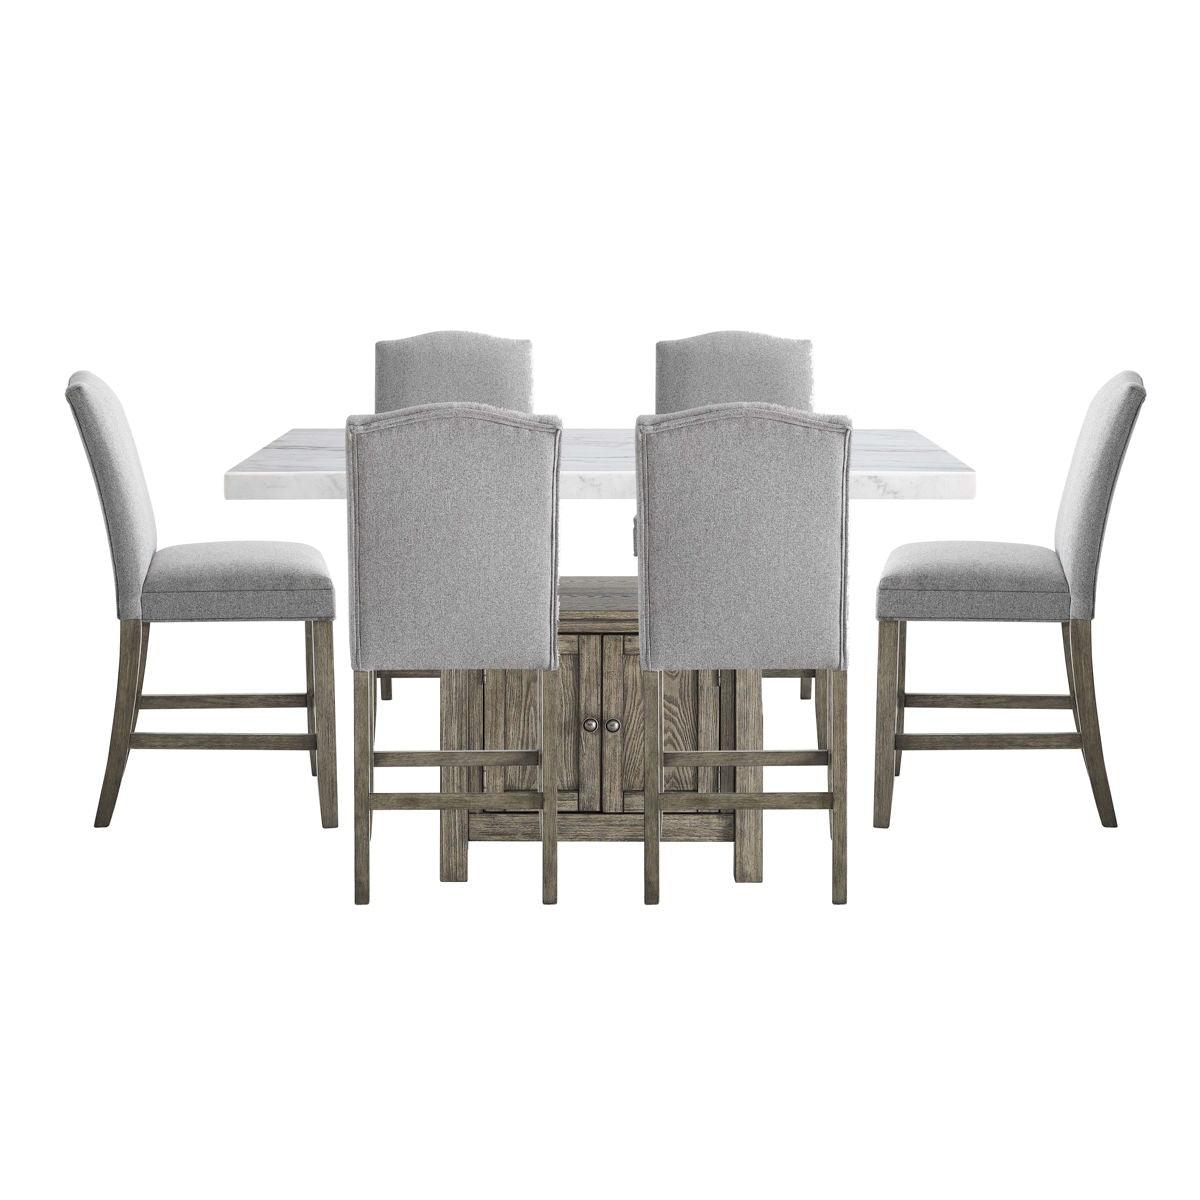 Steve Silver Furniture - Grayson - Counter Height Set - Driftwood Base - 5th Avenue Furniture